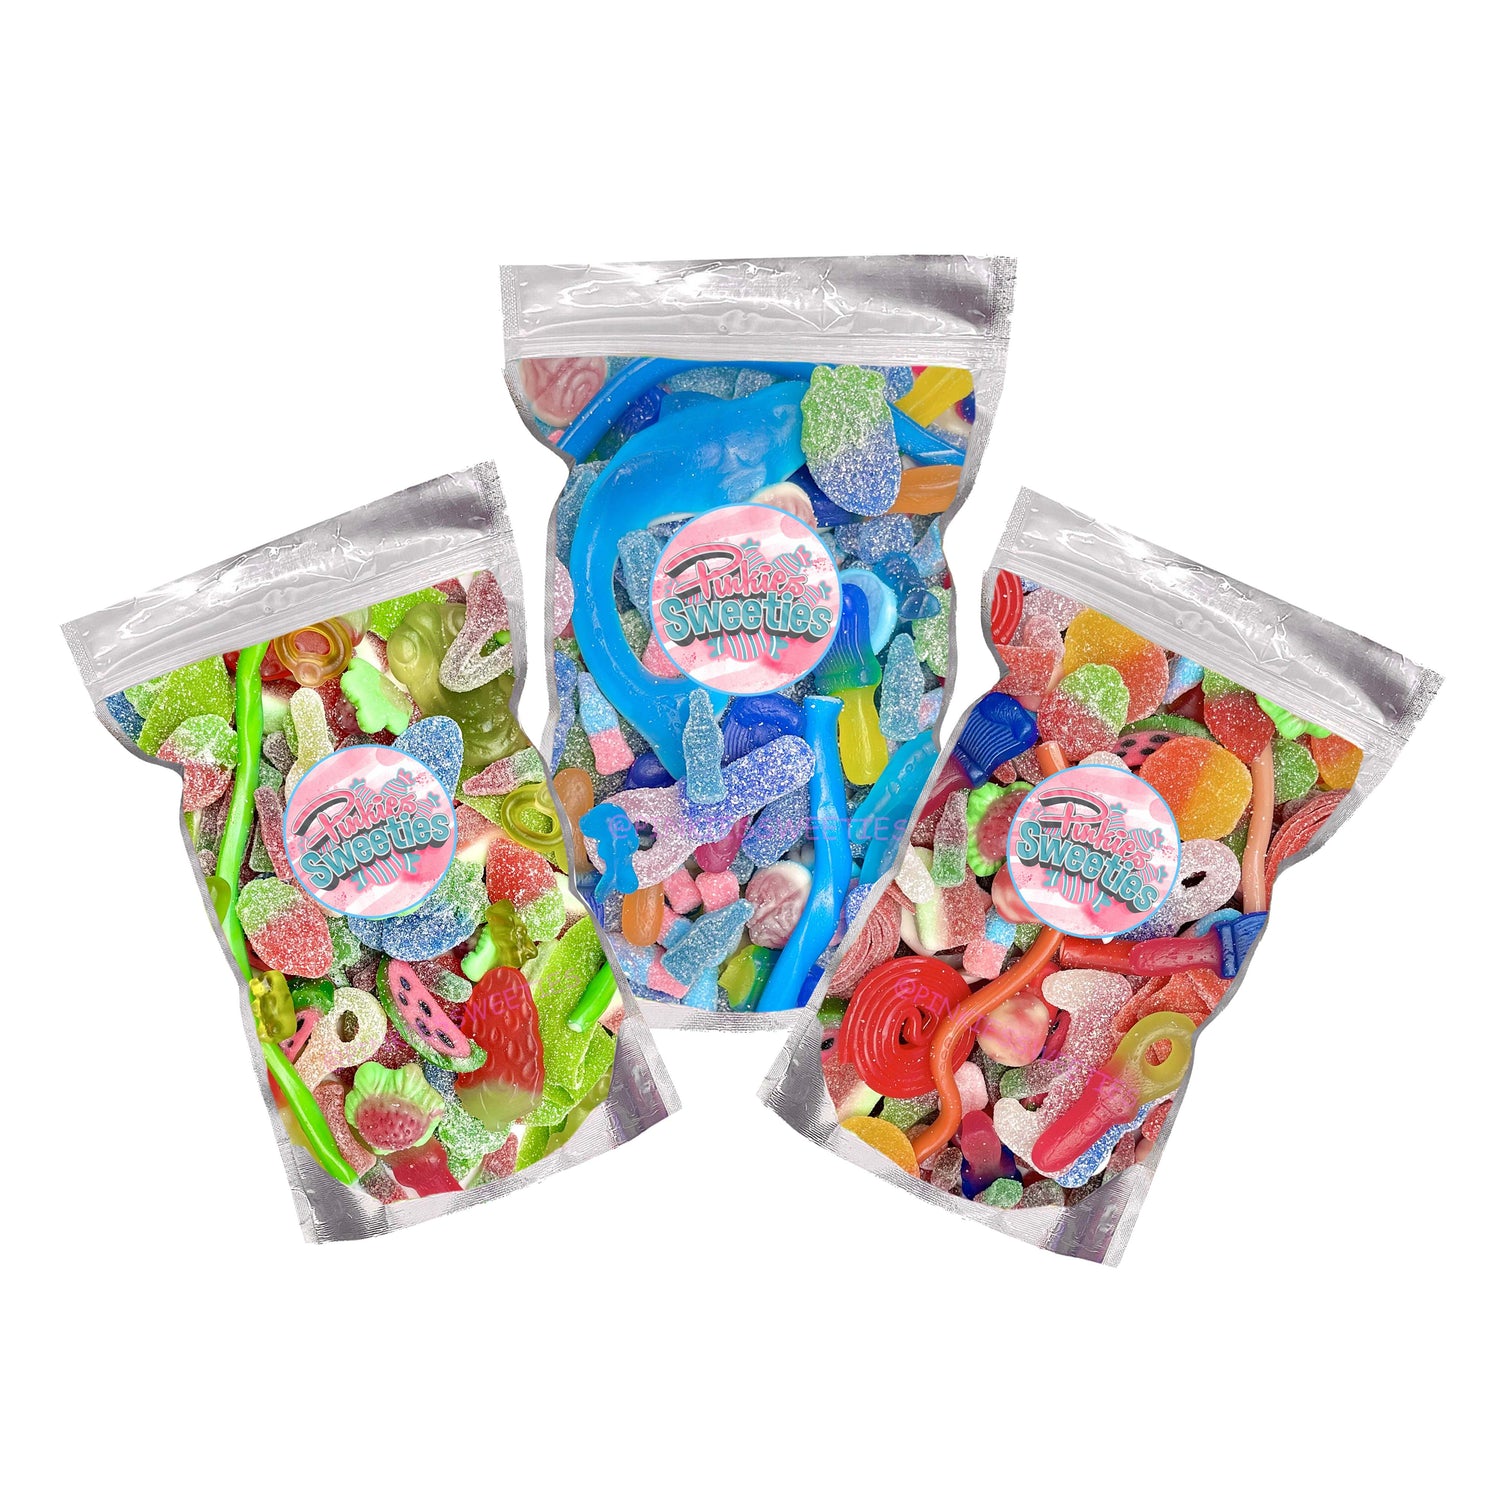 Clearance – The Wee Sweetie Company